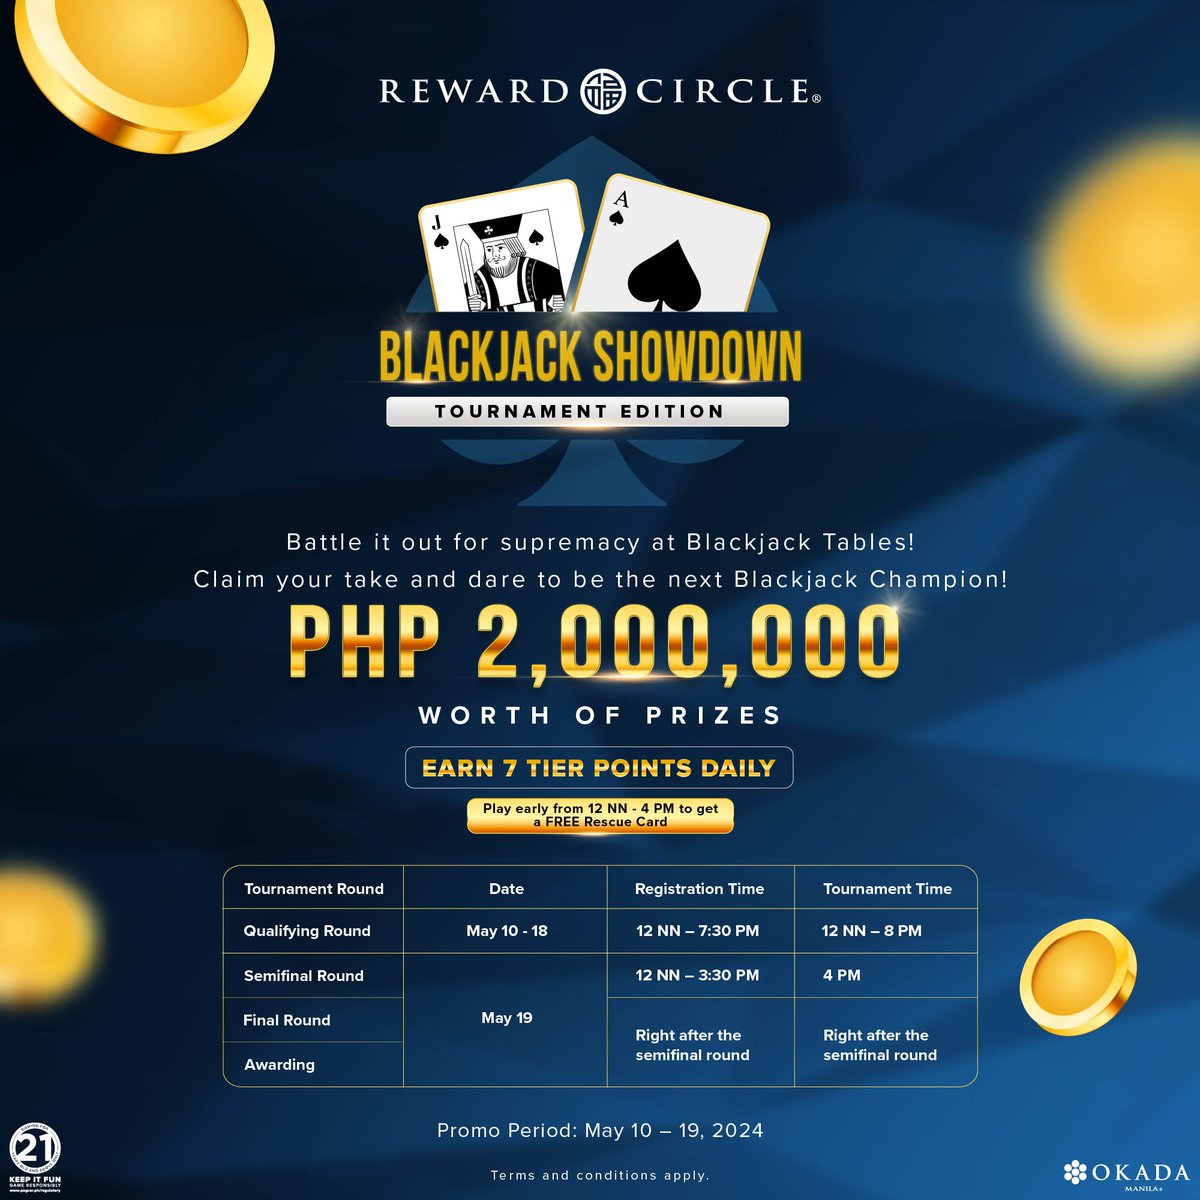 The tables are heating up for the ultimate Blackjack Showdown! Join the tournament from May 10 to 19, 2024, and get a chance to win your share of over PHP 2 million worth of prizes. Click here to know more: okdmnl.ph/BlackjackShowd…